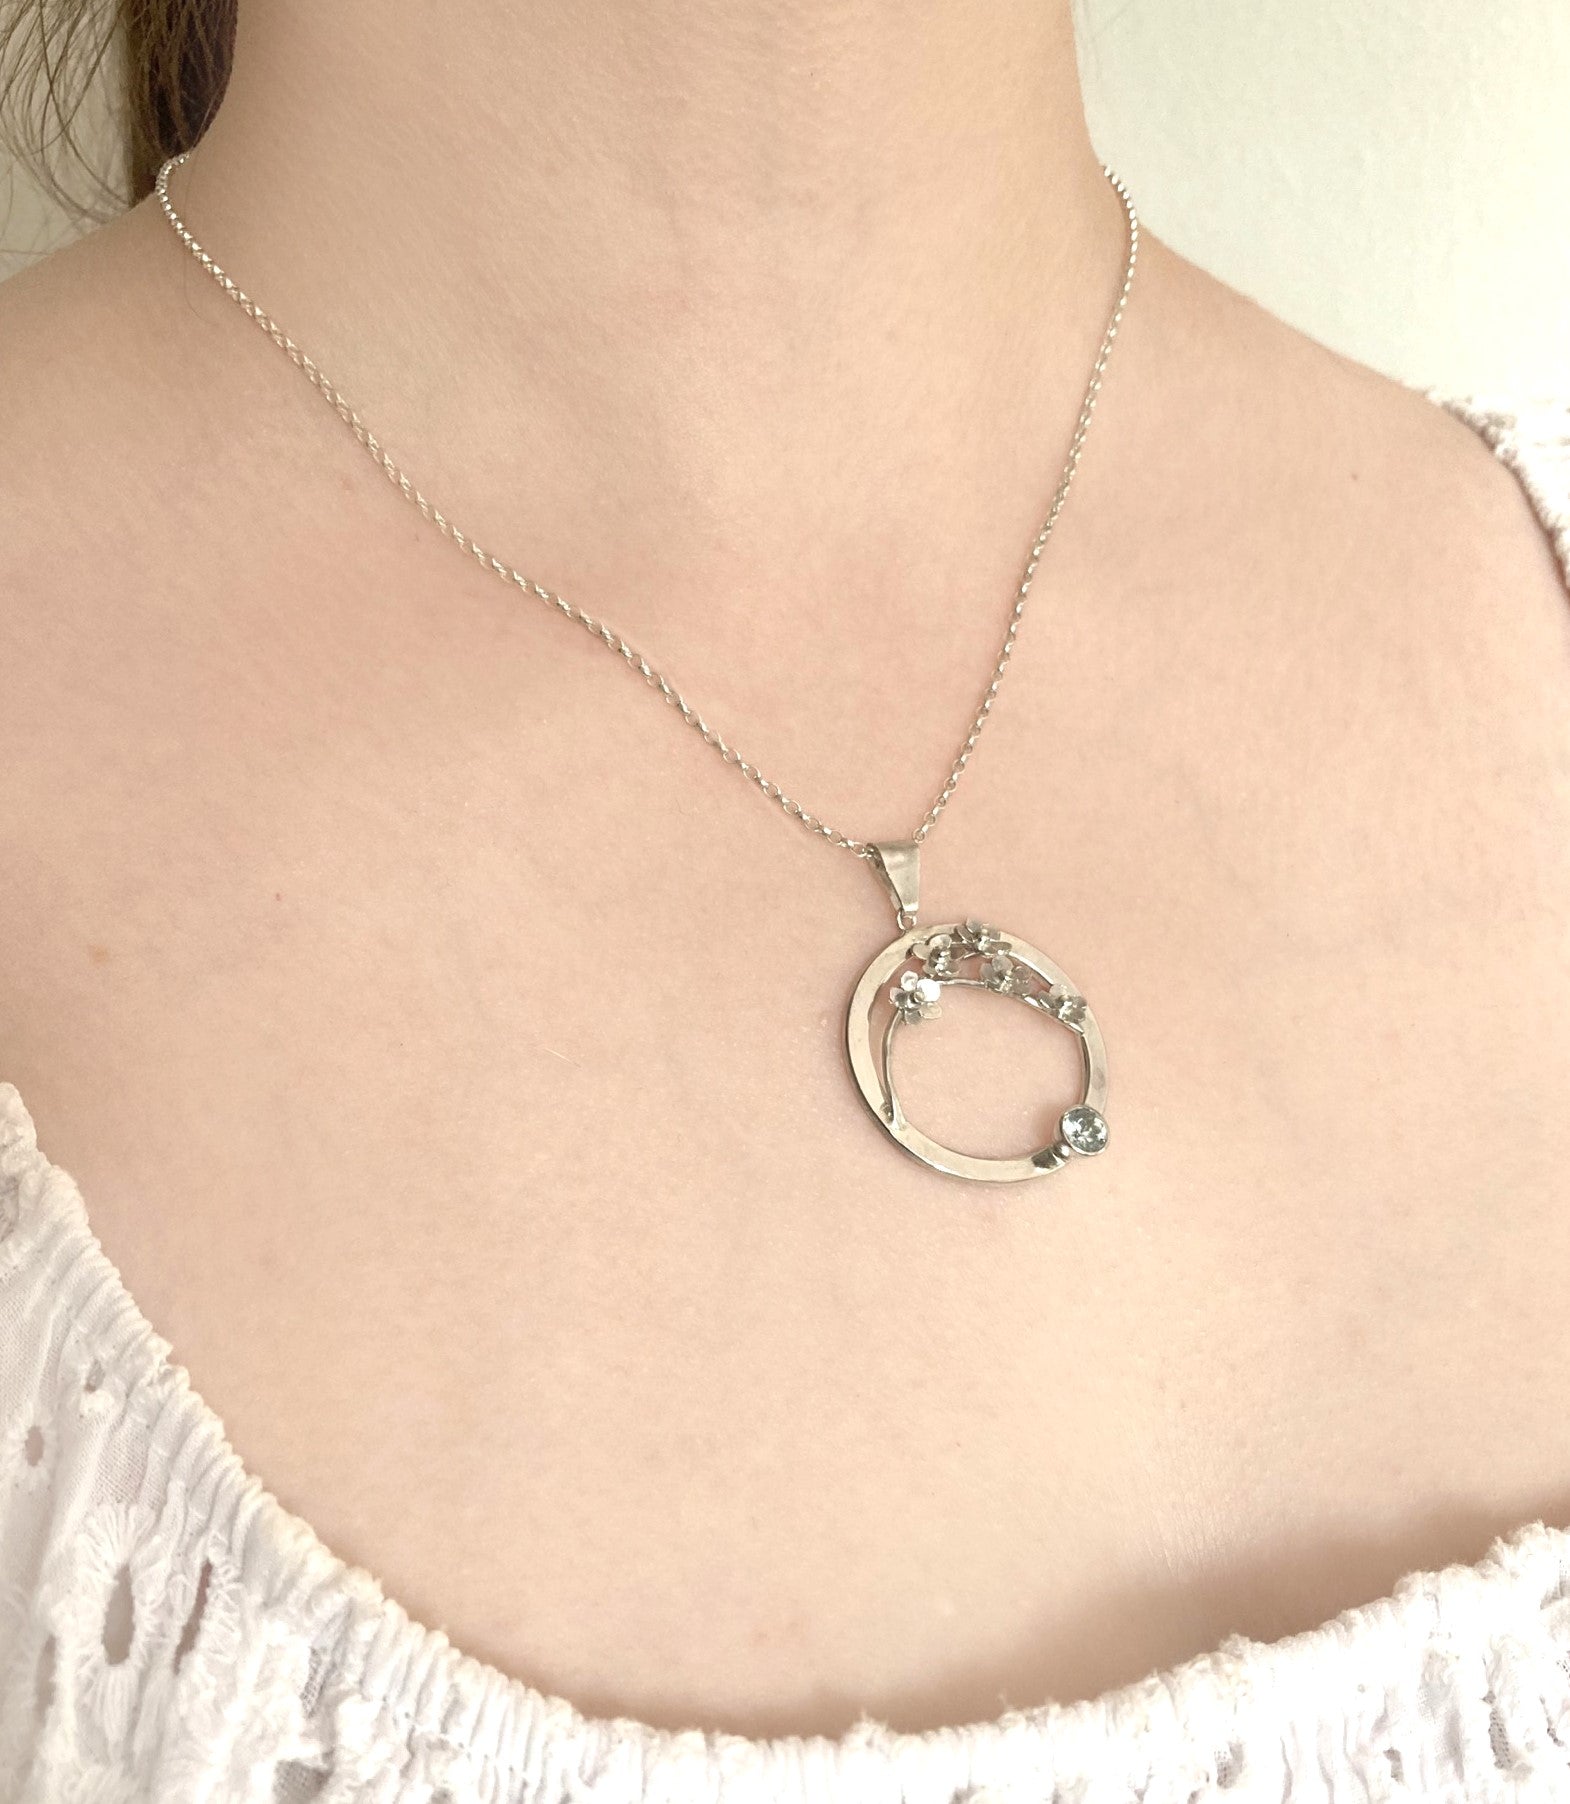 woman's neck wearing silver chain and floral circle pendant